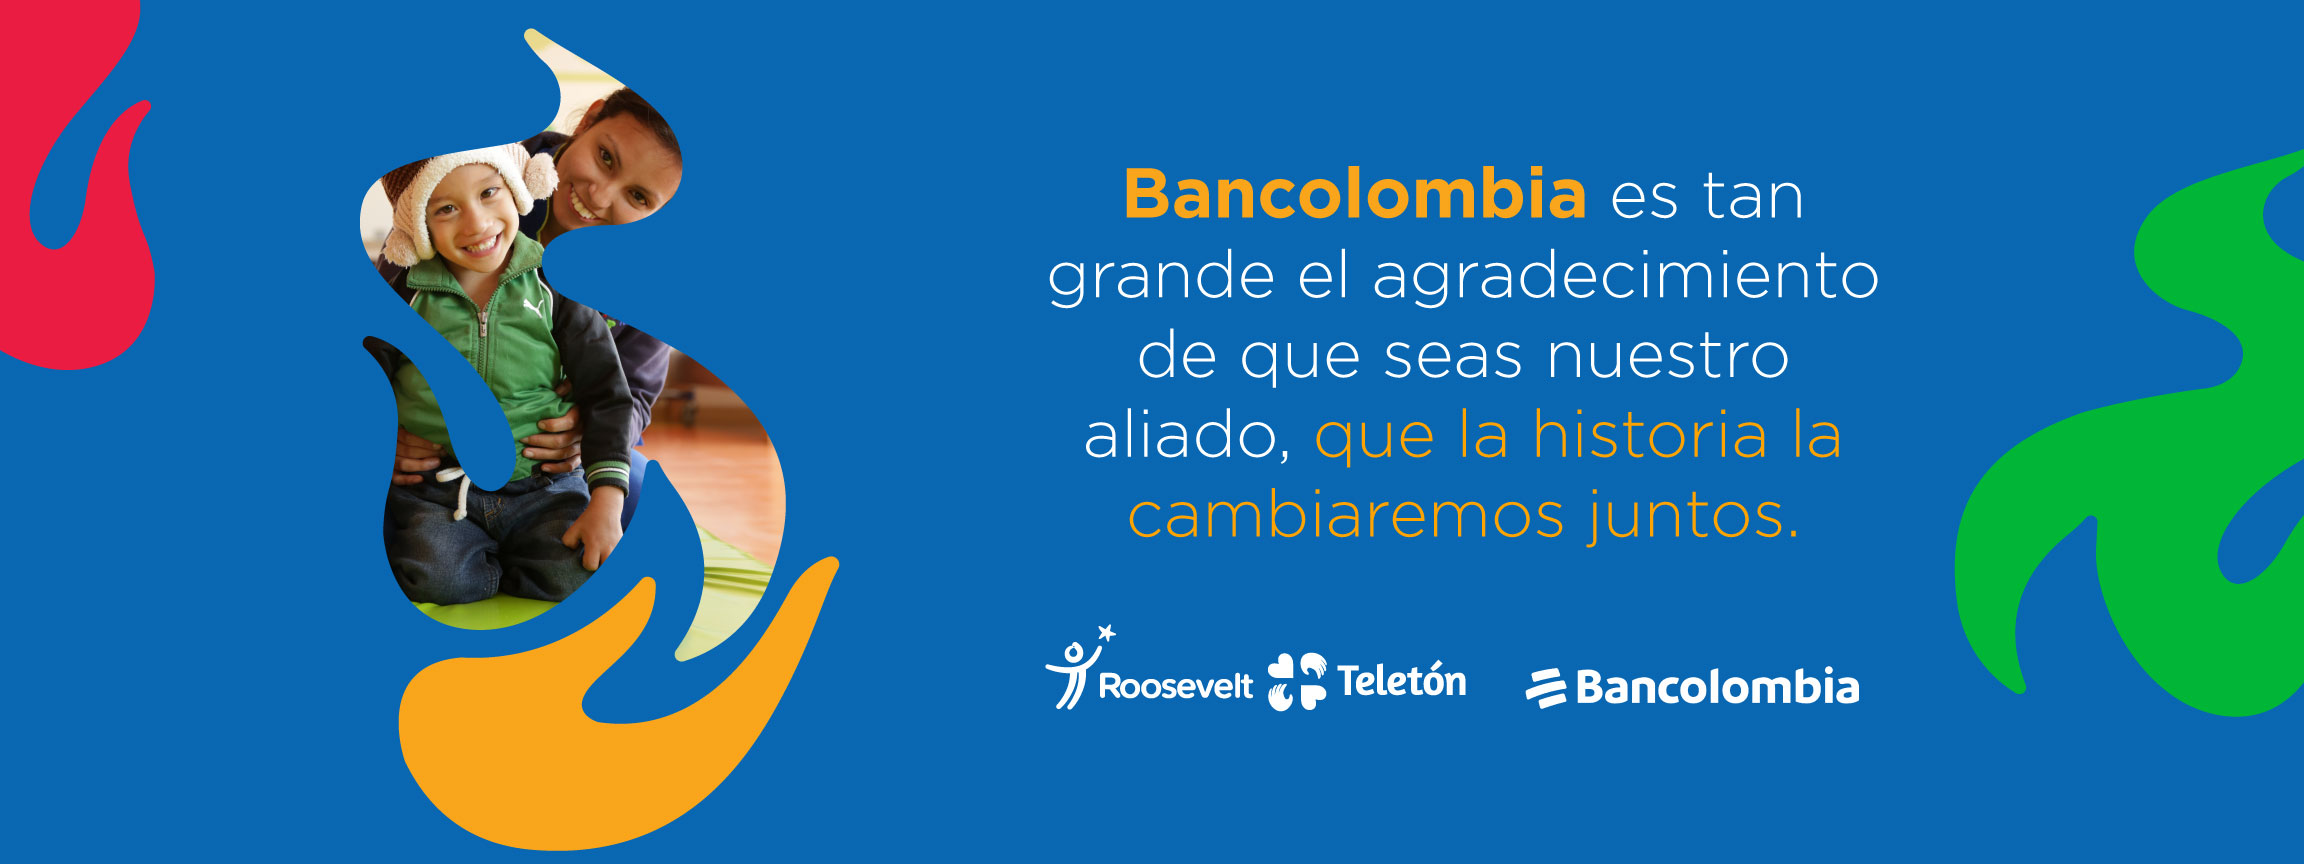 Bancolombia-PC